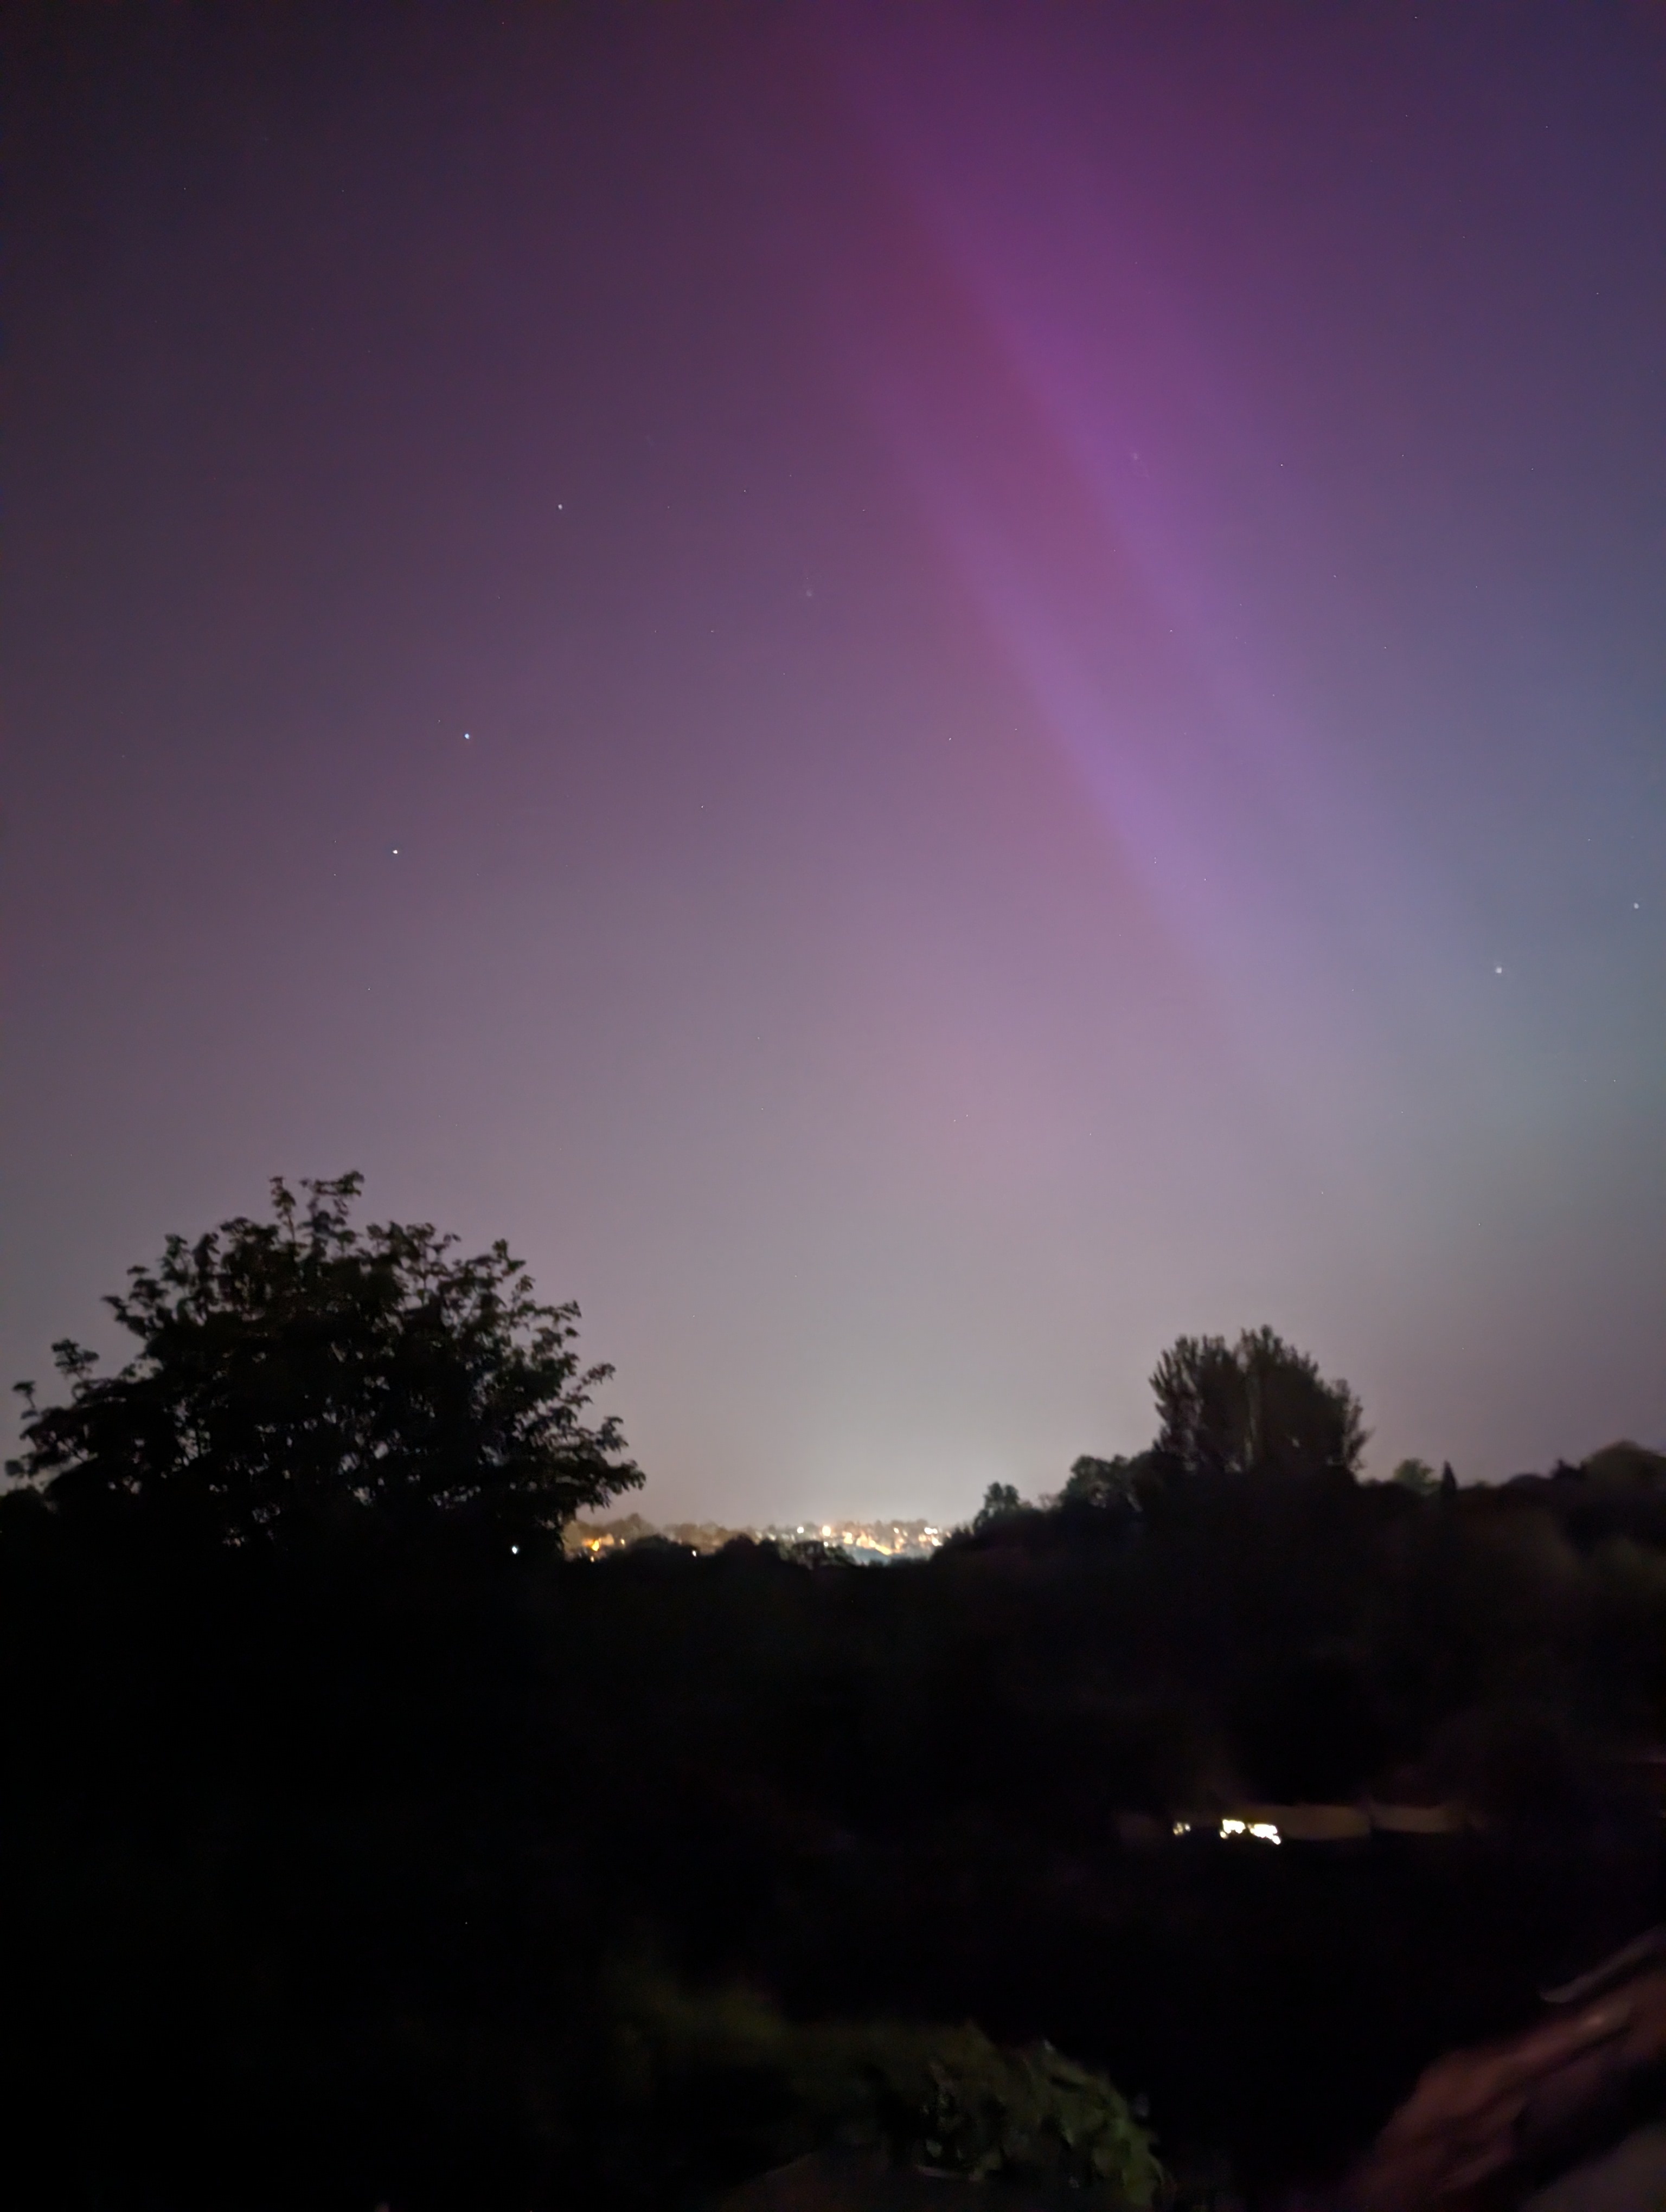 Faint purple and pink hues of the Northern lights captured in the UK.